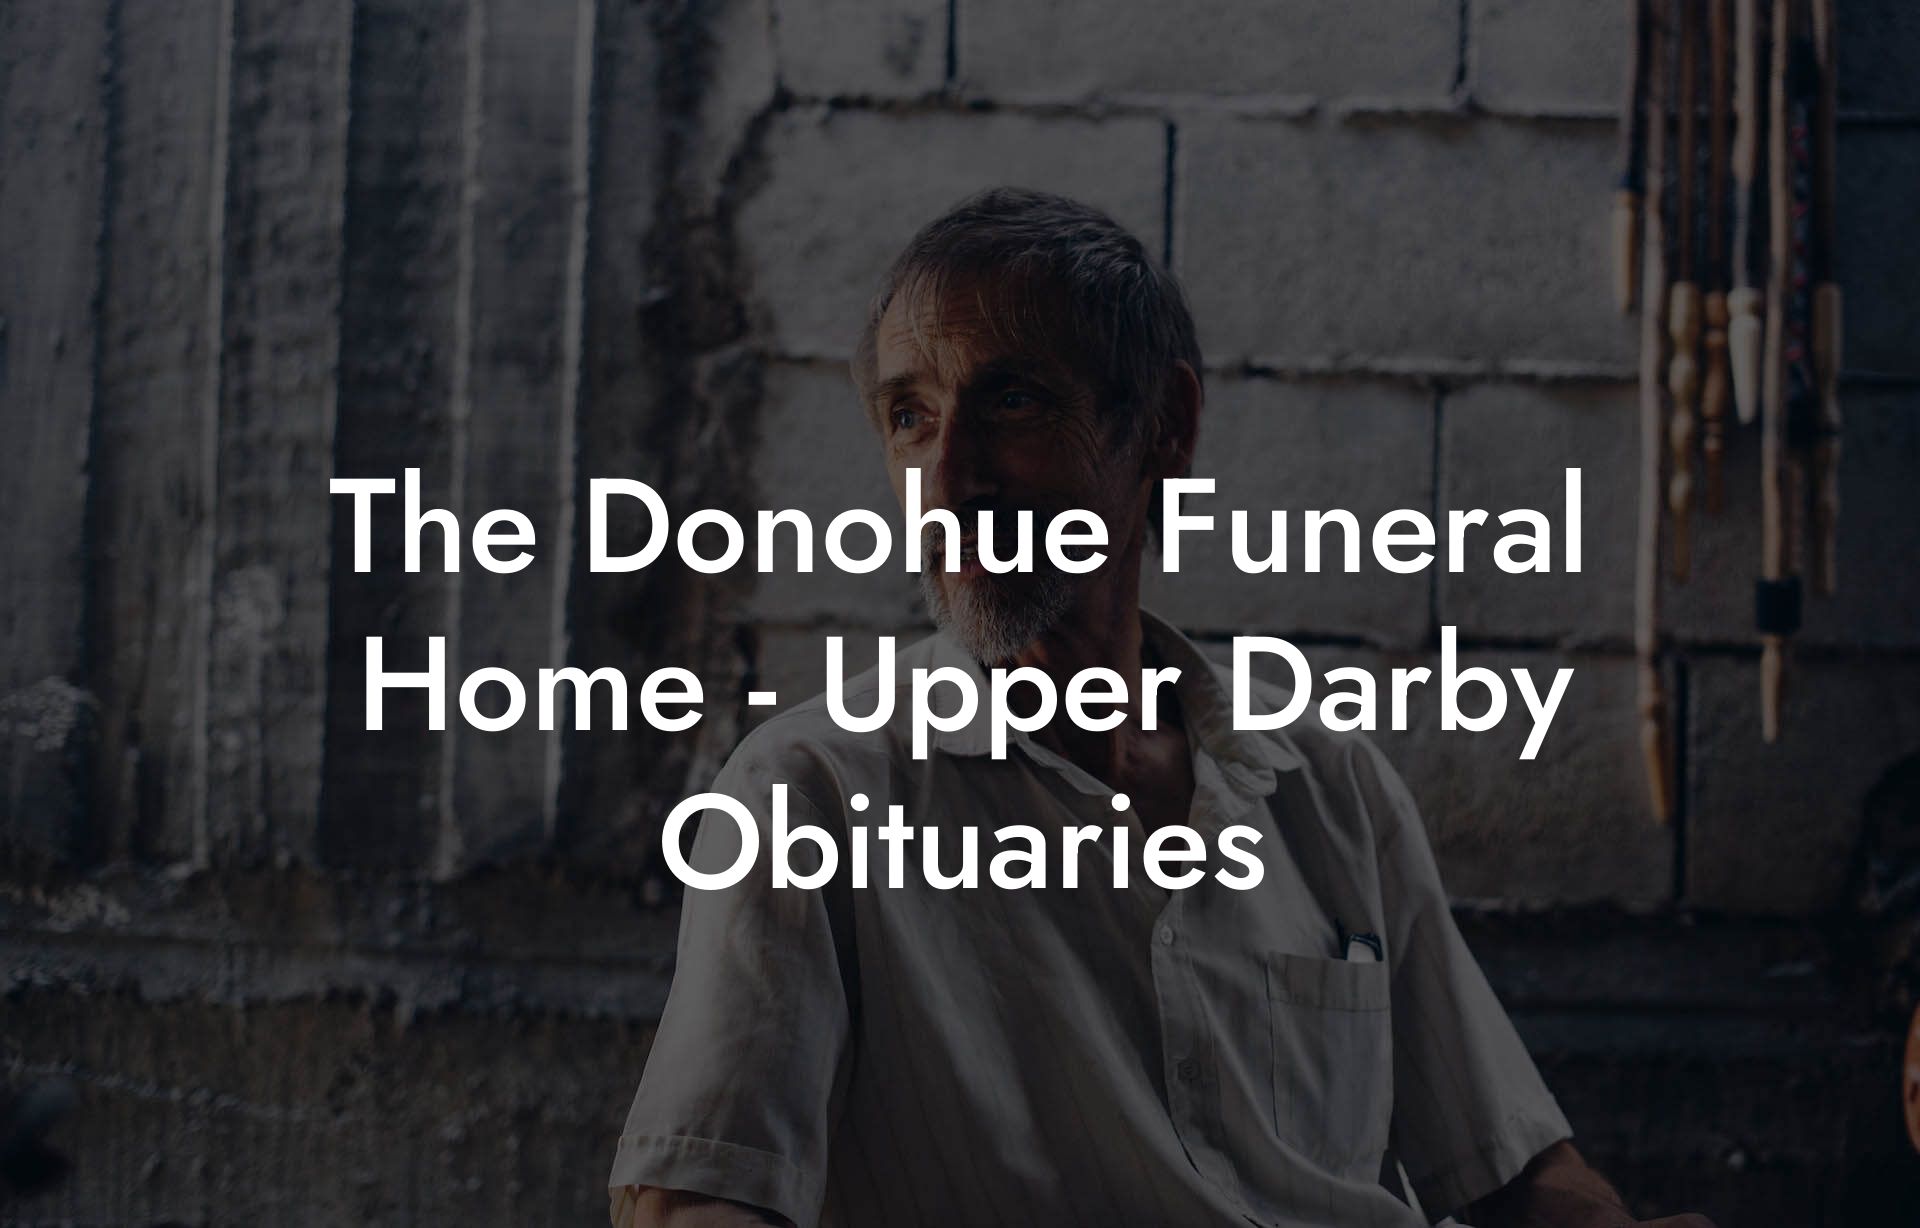 The Donohue Funeral Home - Upper Darby Obituaries